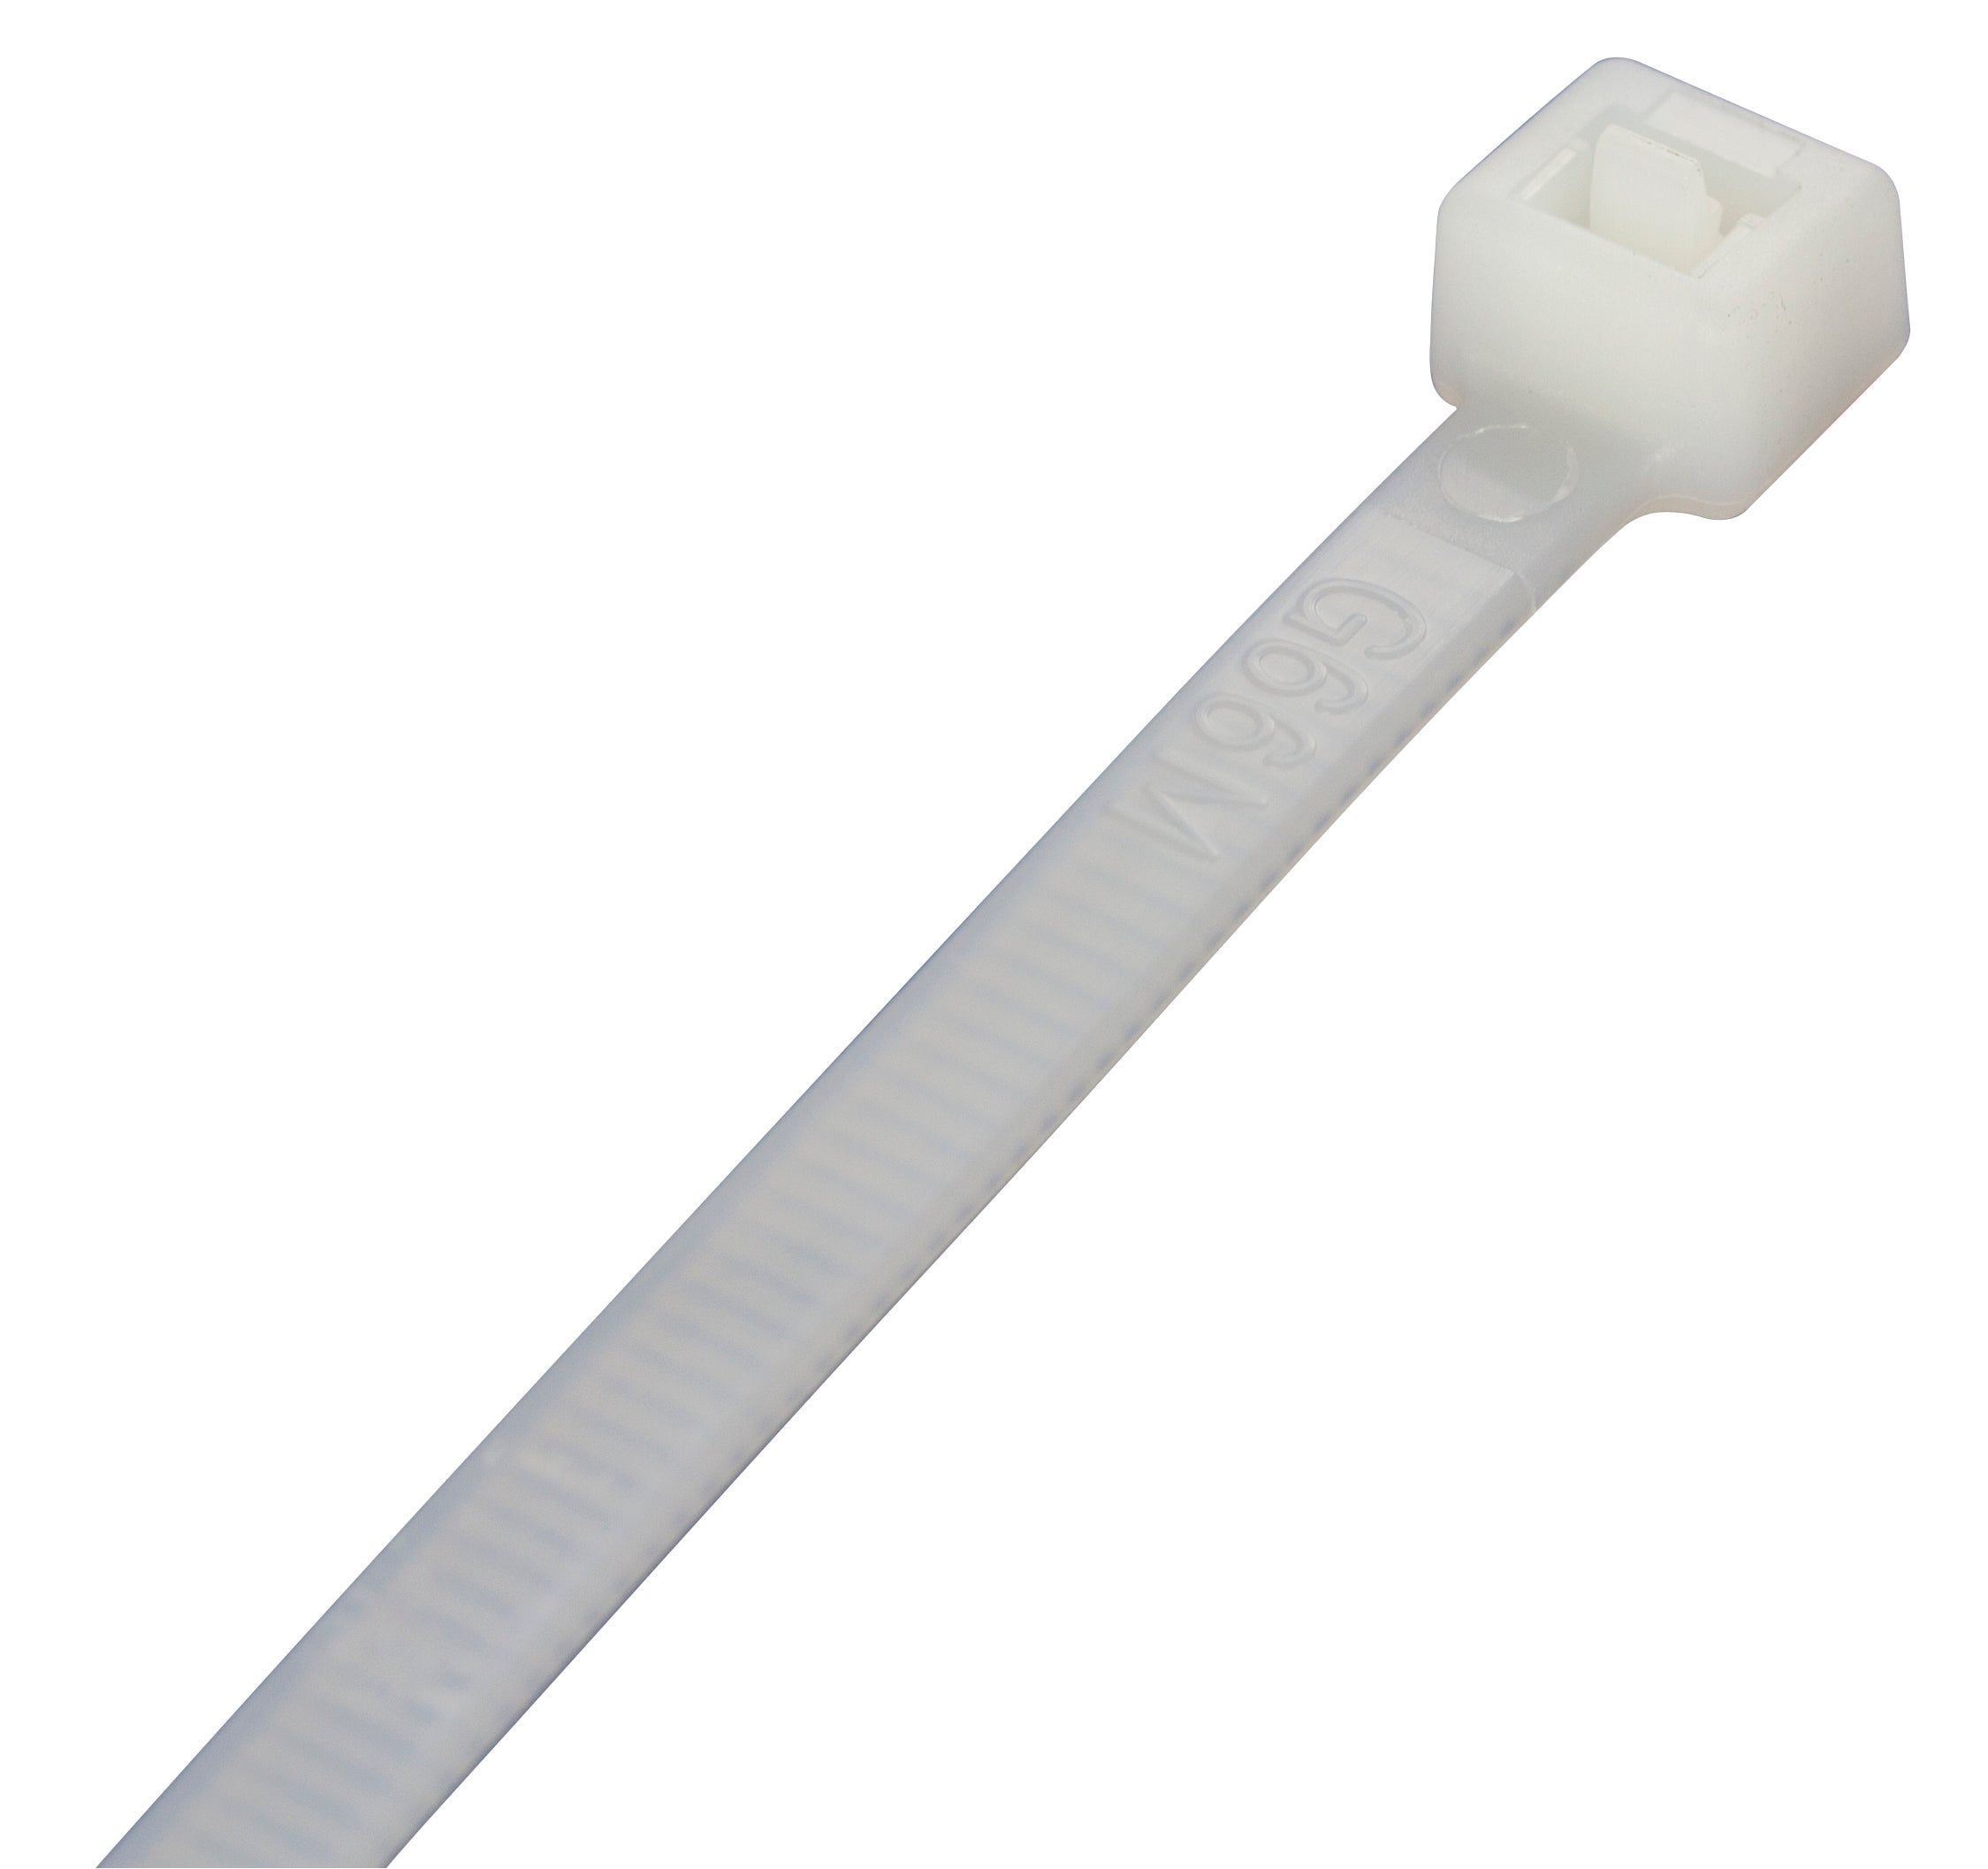 Premium Natural Cable Ties 160mm x 2.5mm - Pack of 100